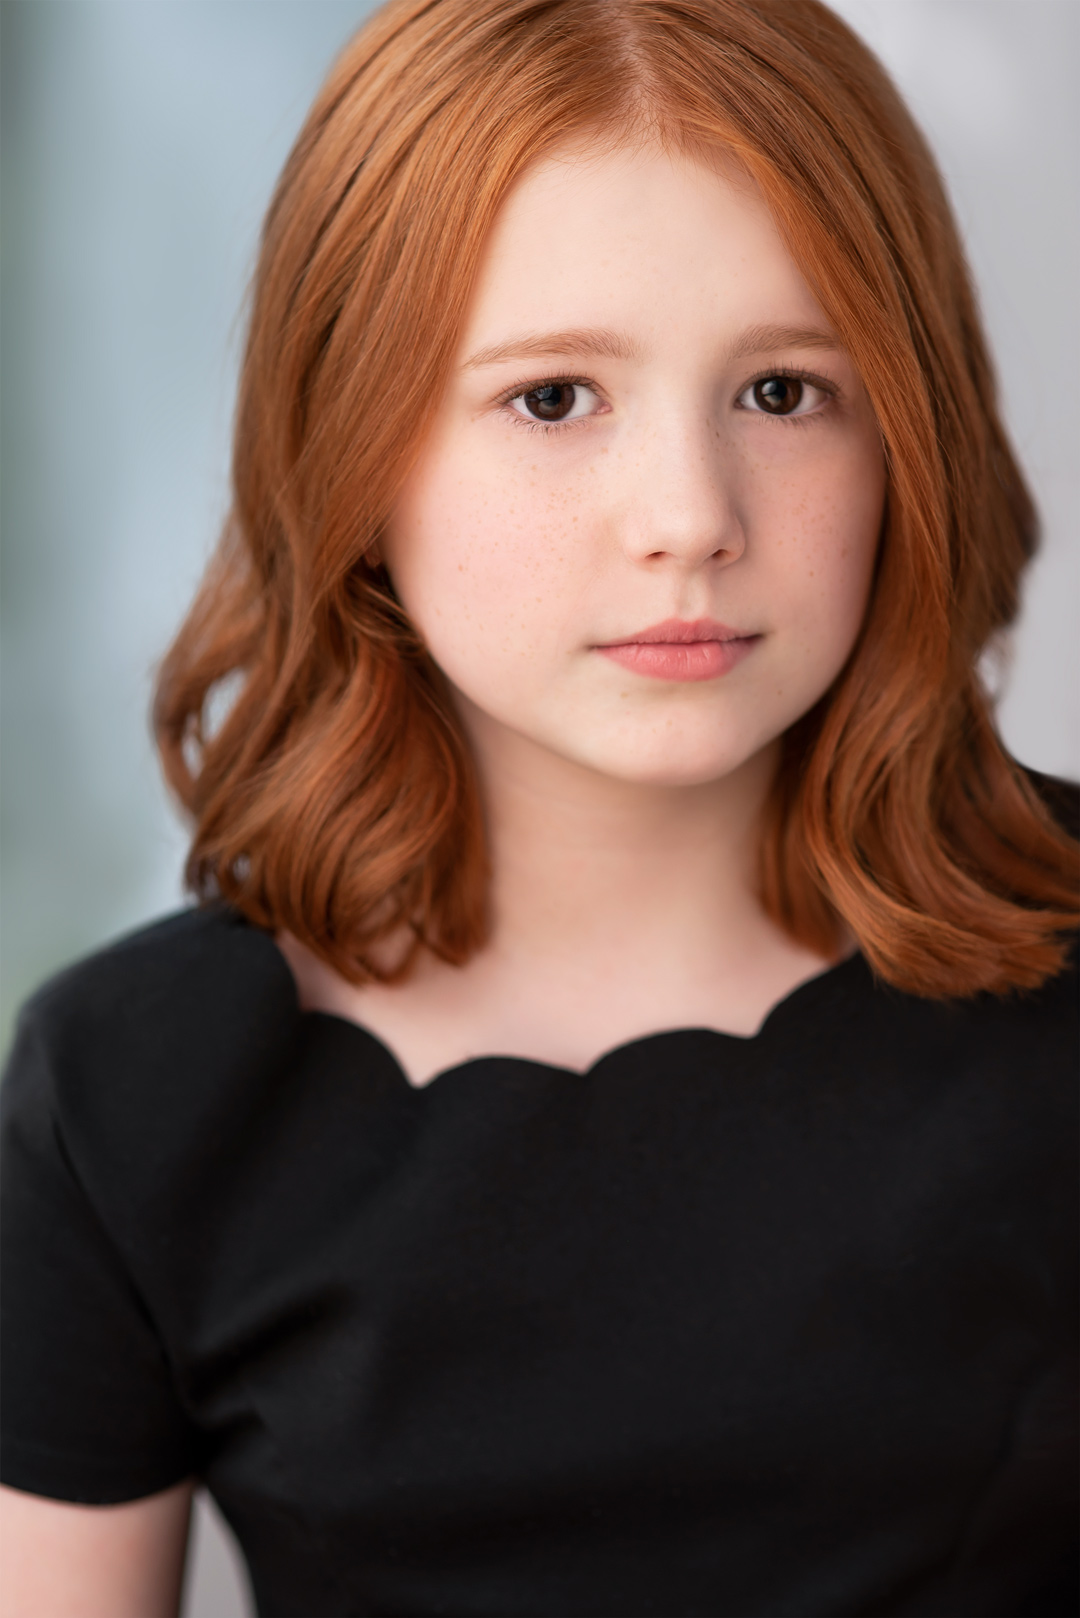 Professional headshot of redhead child actor Daphne Hoskins from Brahms the boy II